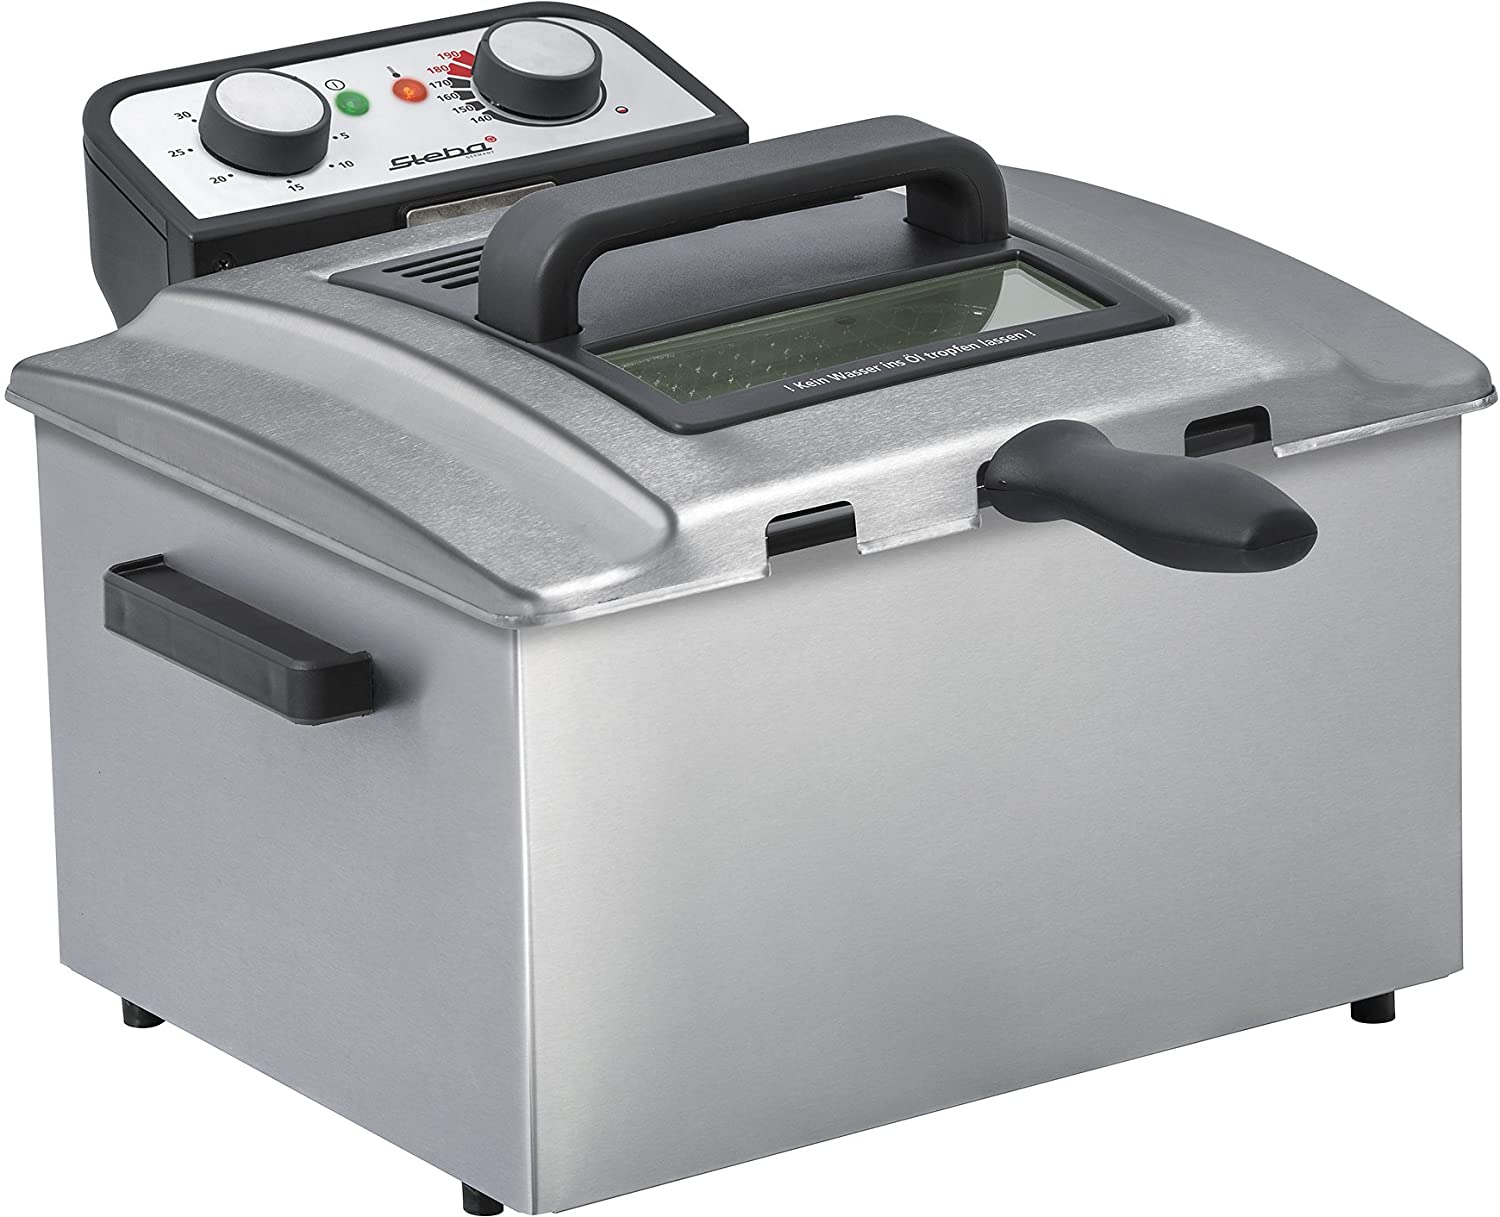 Steba DF 300 stainless steel fryer, 5 litres, professional heating system, cold zone principle